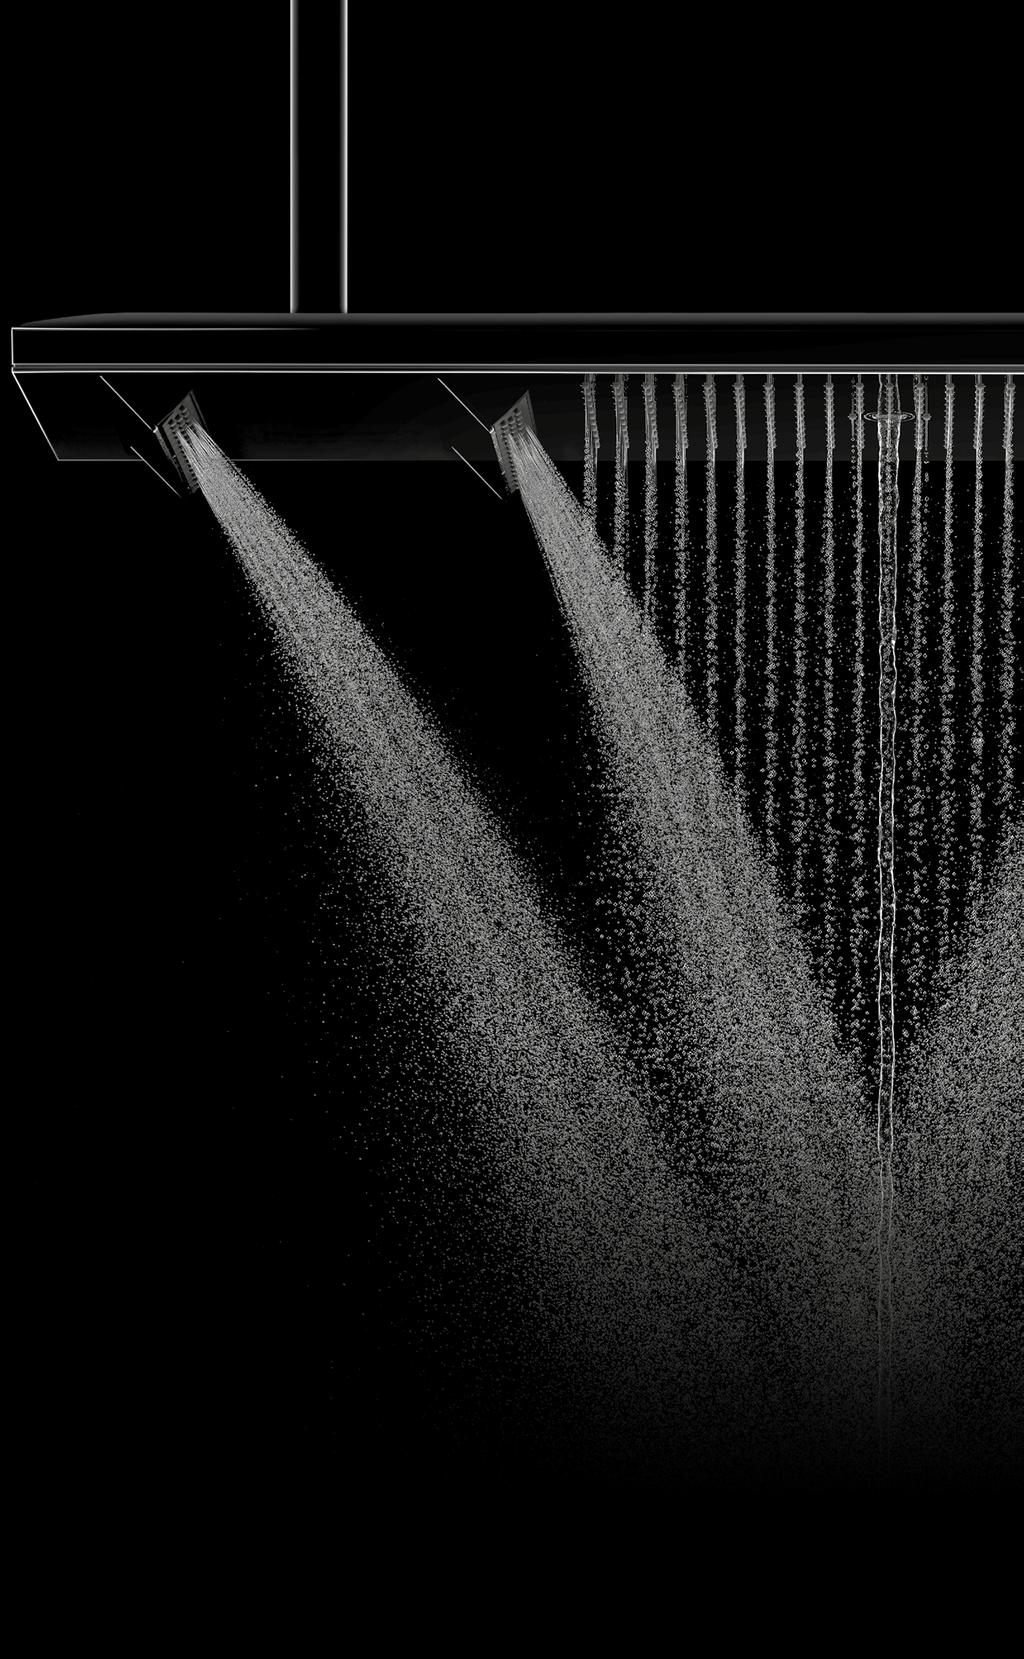 AXOR SHOWERS FORM